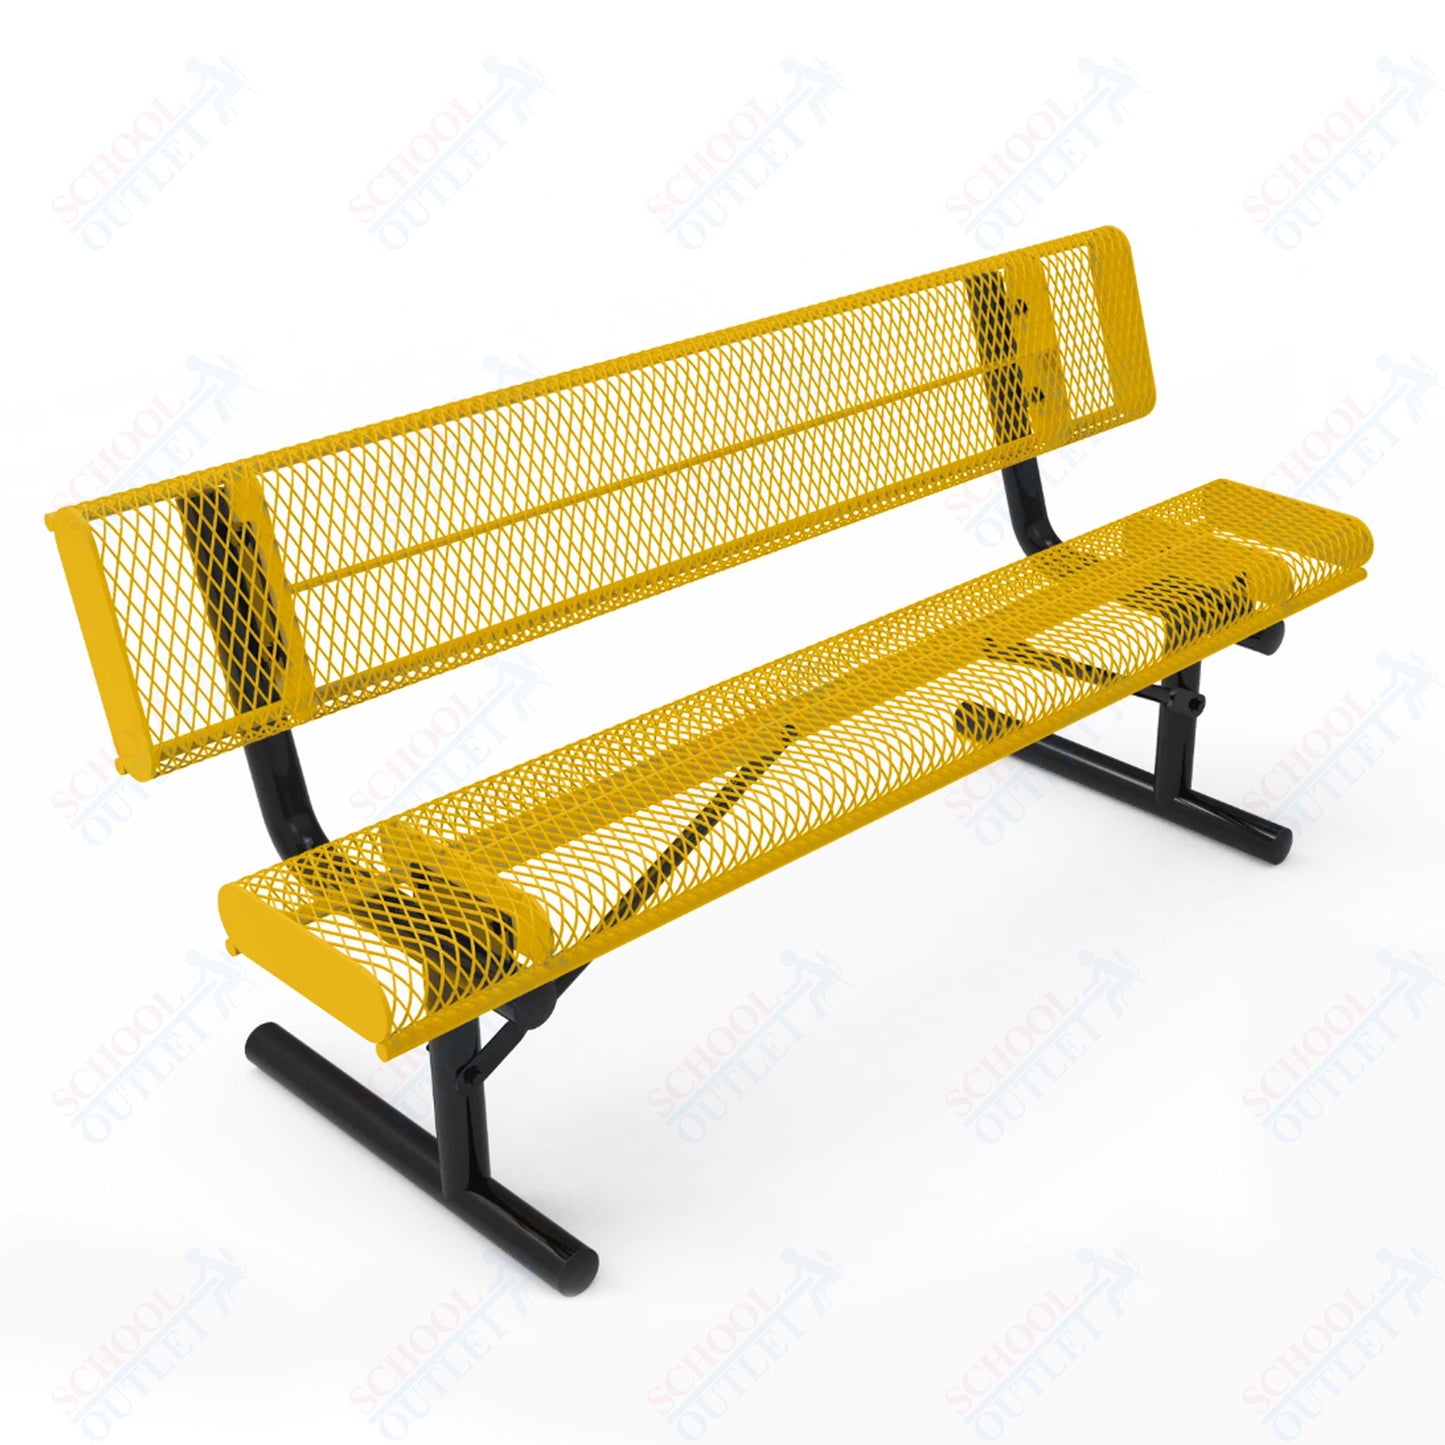 MyTcoat - Rolled Edges Outdoor Portable Bench with Back 6' L (MYT-BRE06-18)